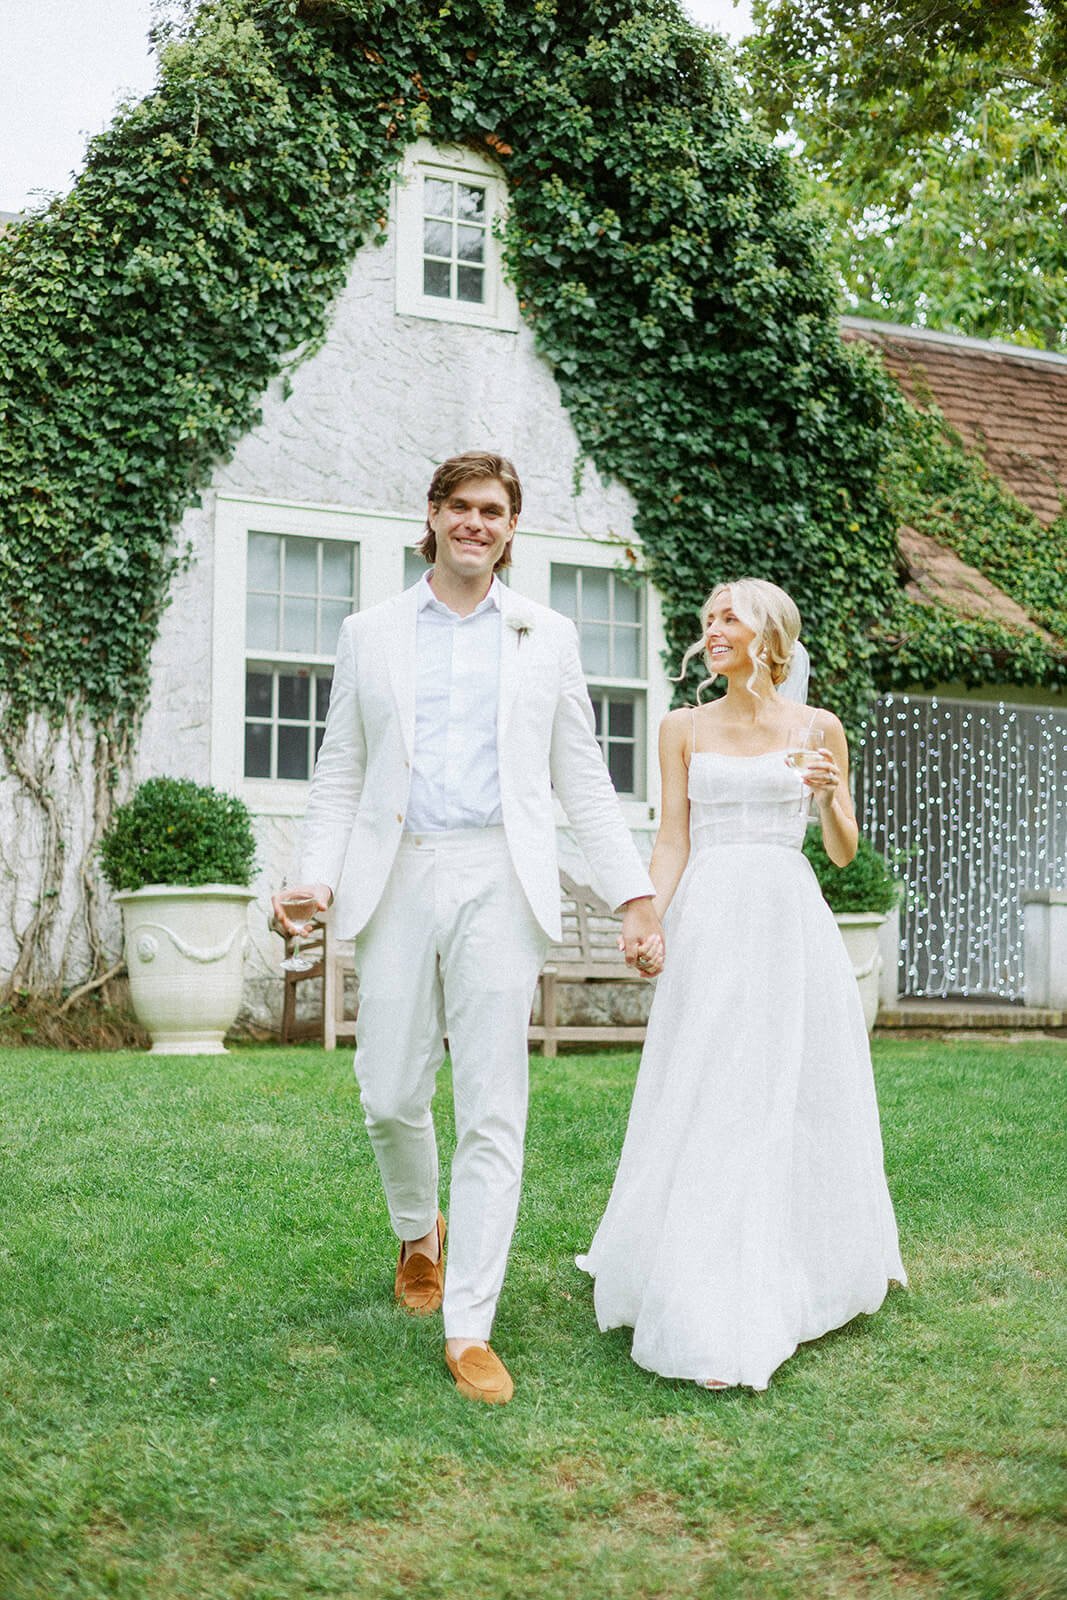 Intimate backyard wedding ceremony at a private home in Montauk, New York